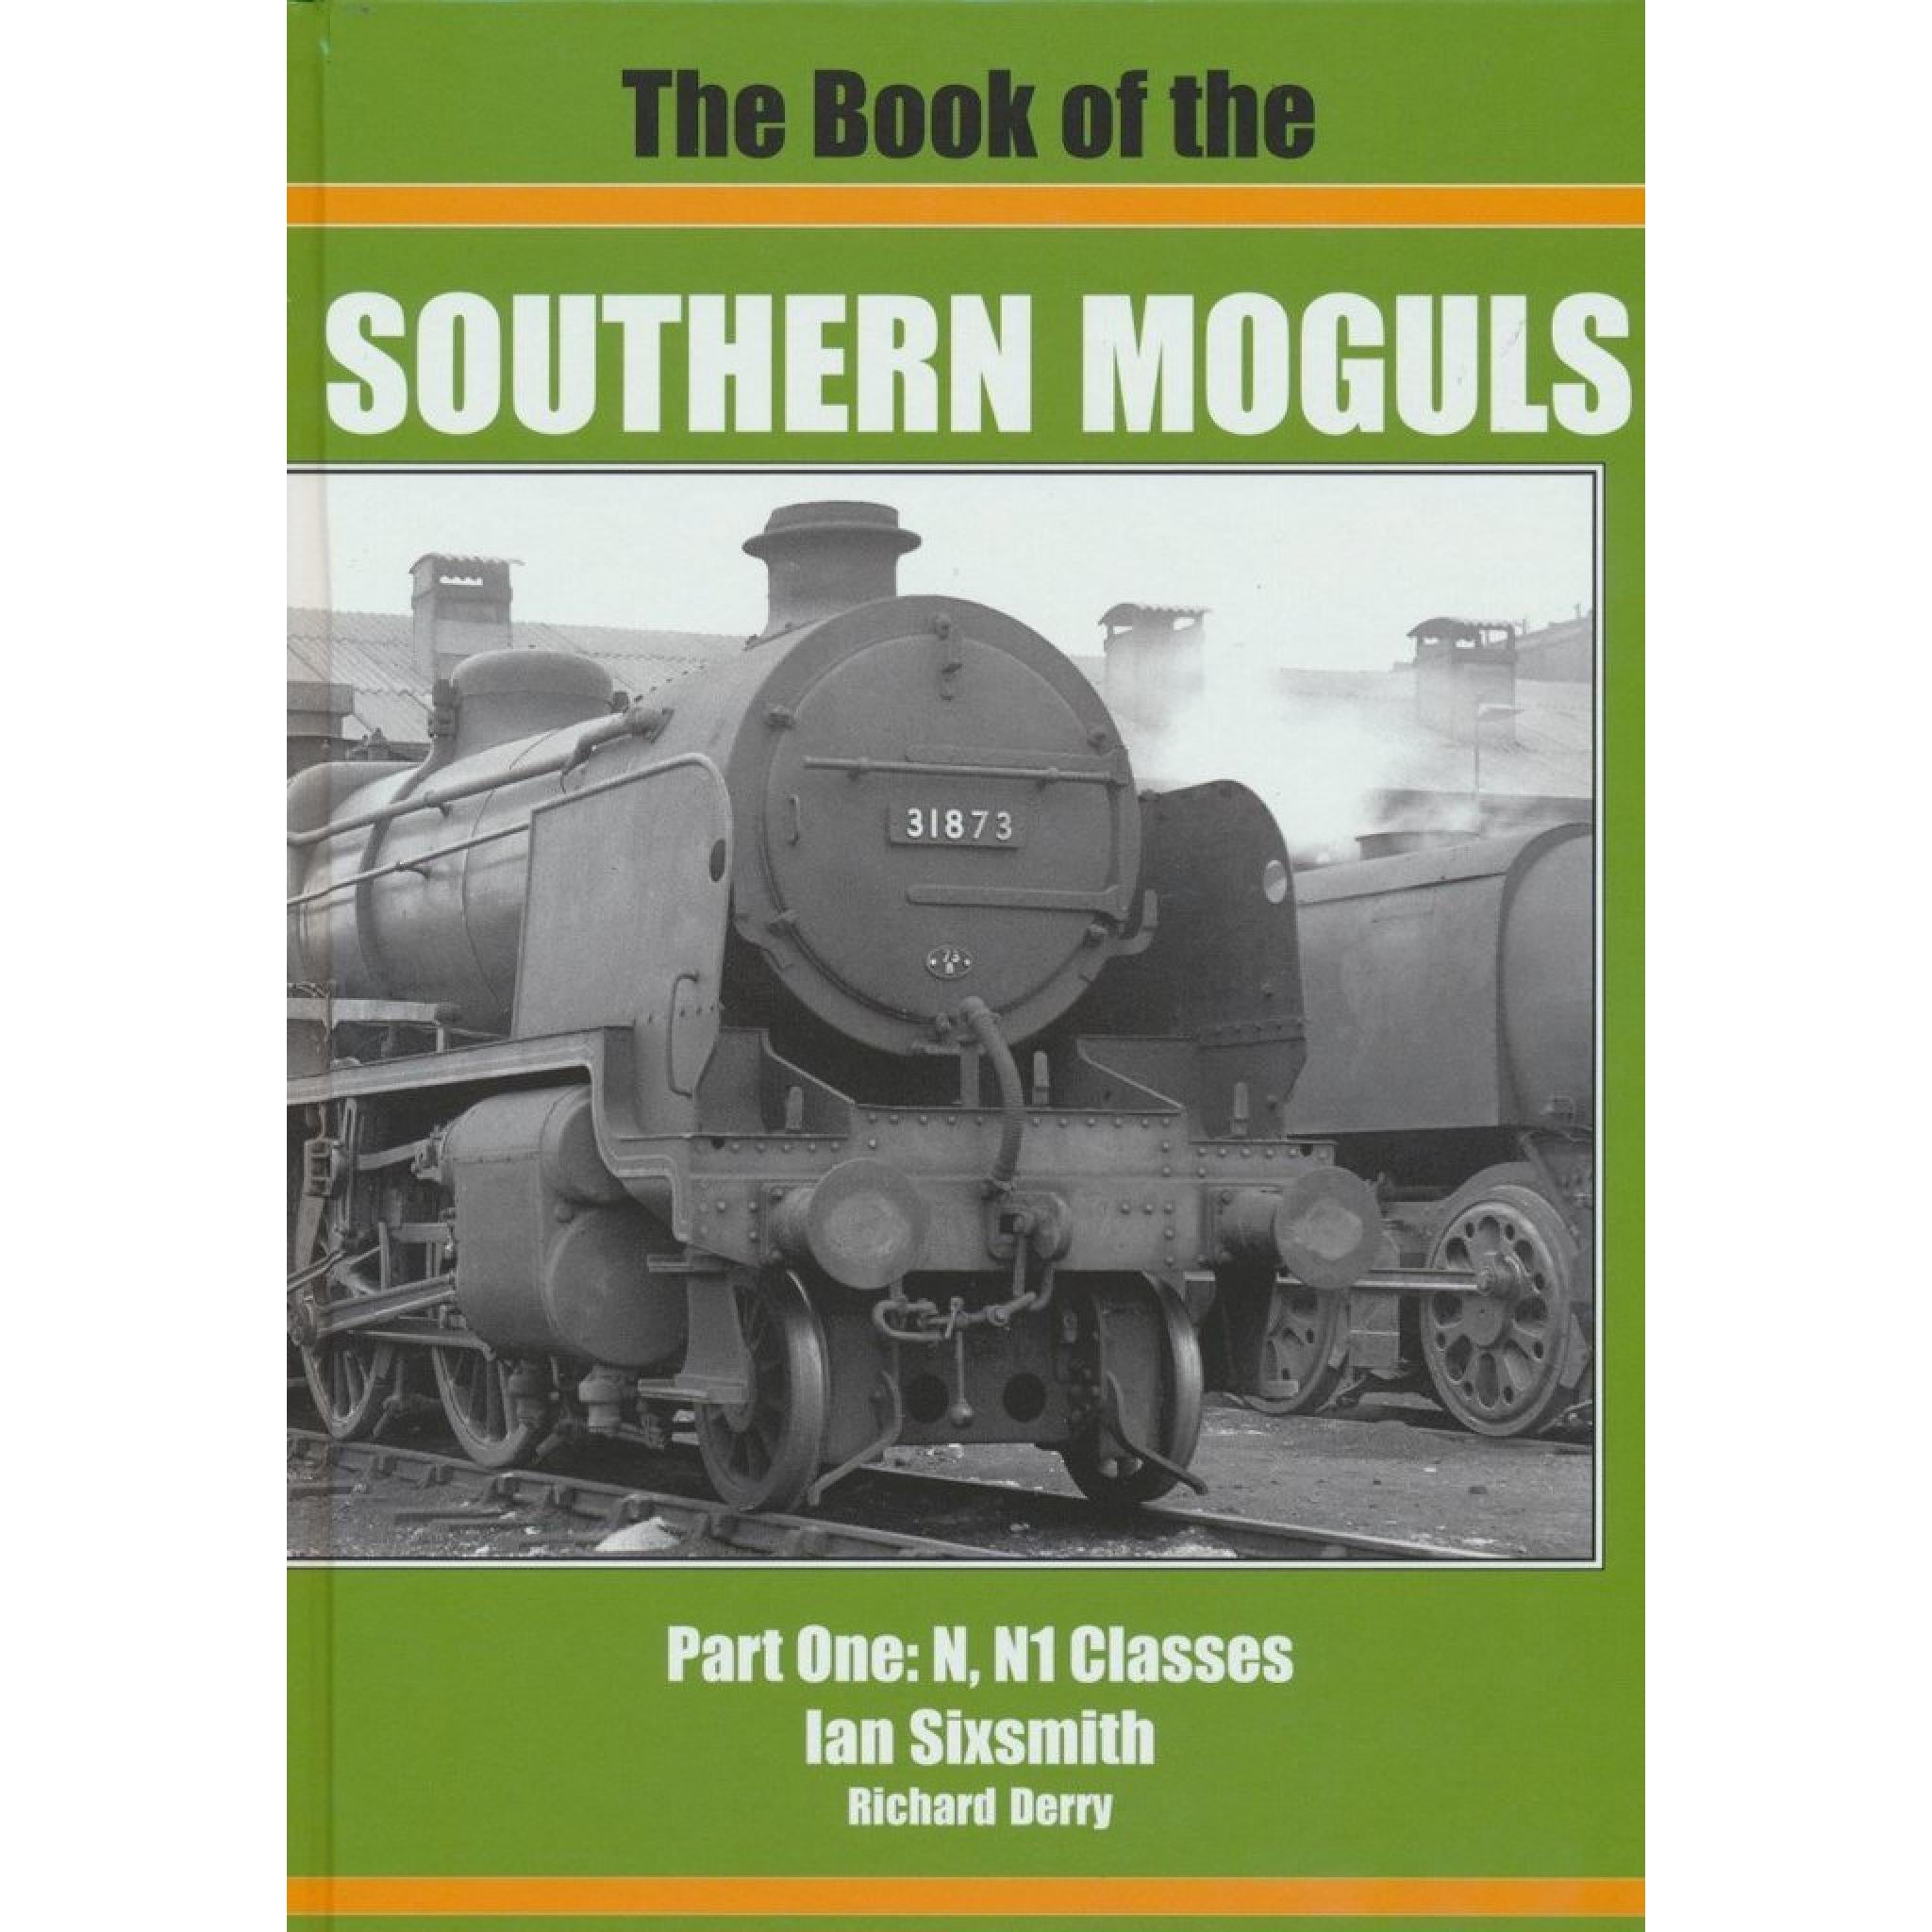 The Book of the Southern Moguls Part One: N, N1 Classes